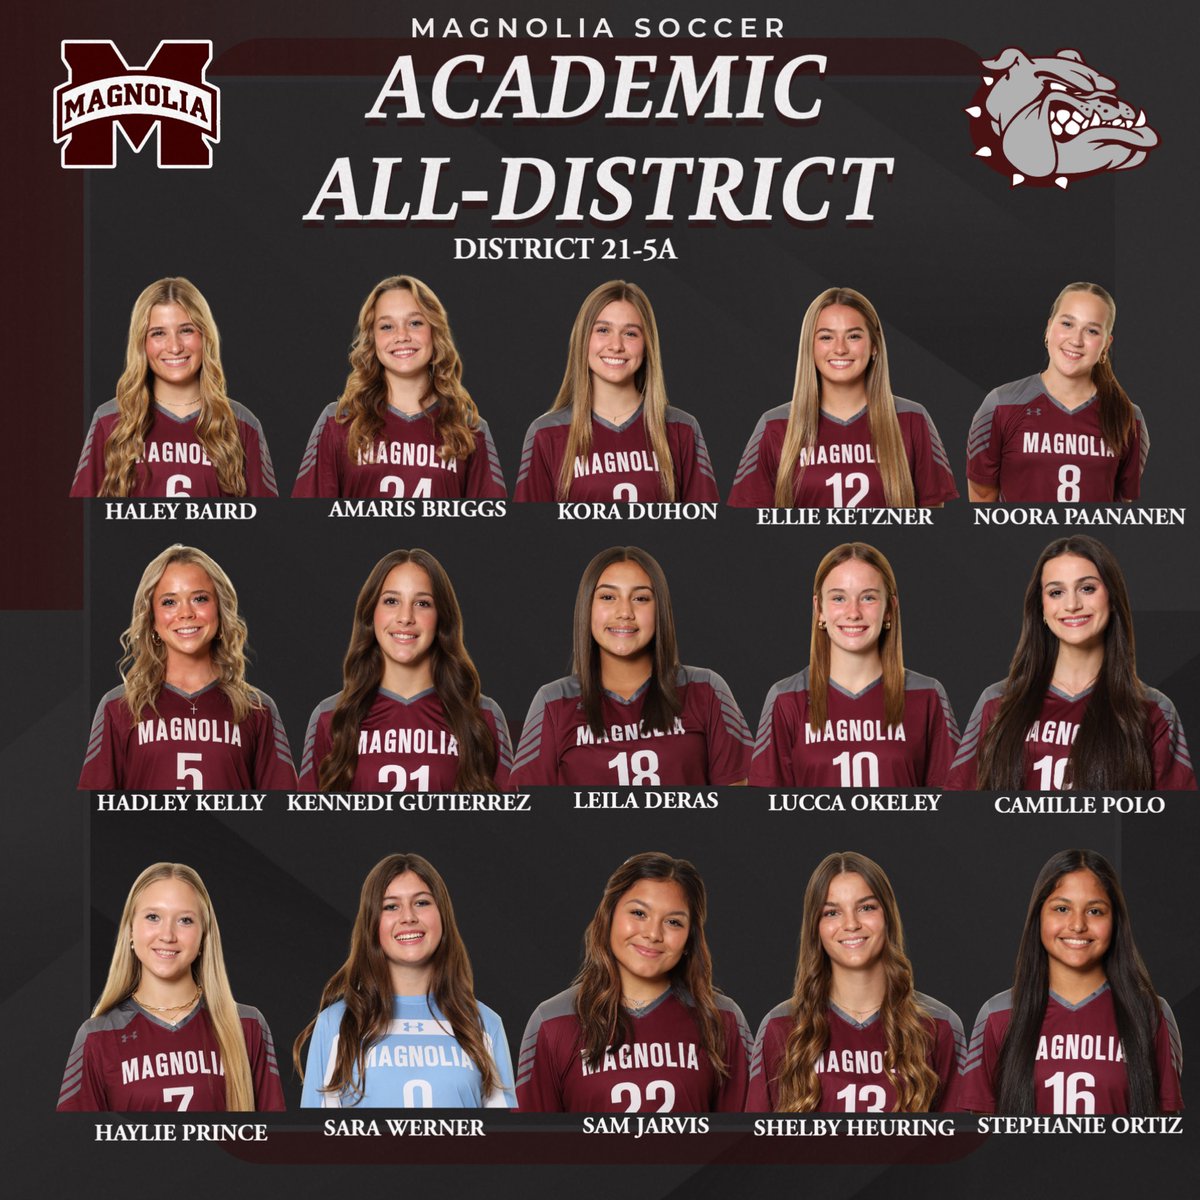 ⚽️Congratulations to our 15 players who earned Academic All-District! We are proud of all your hard work!